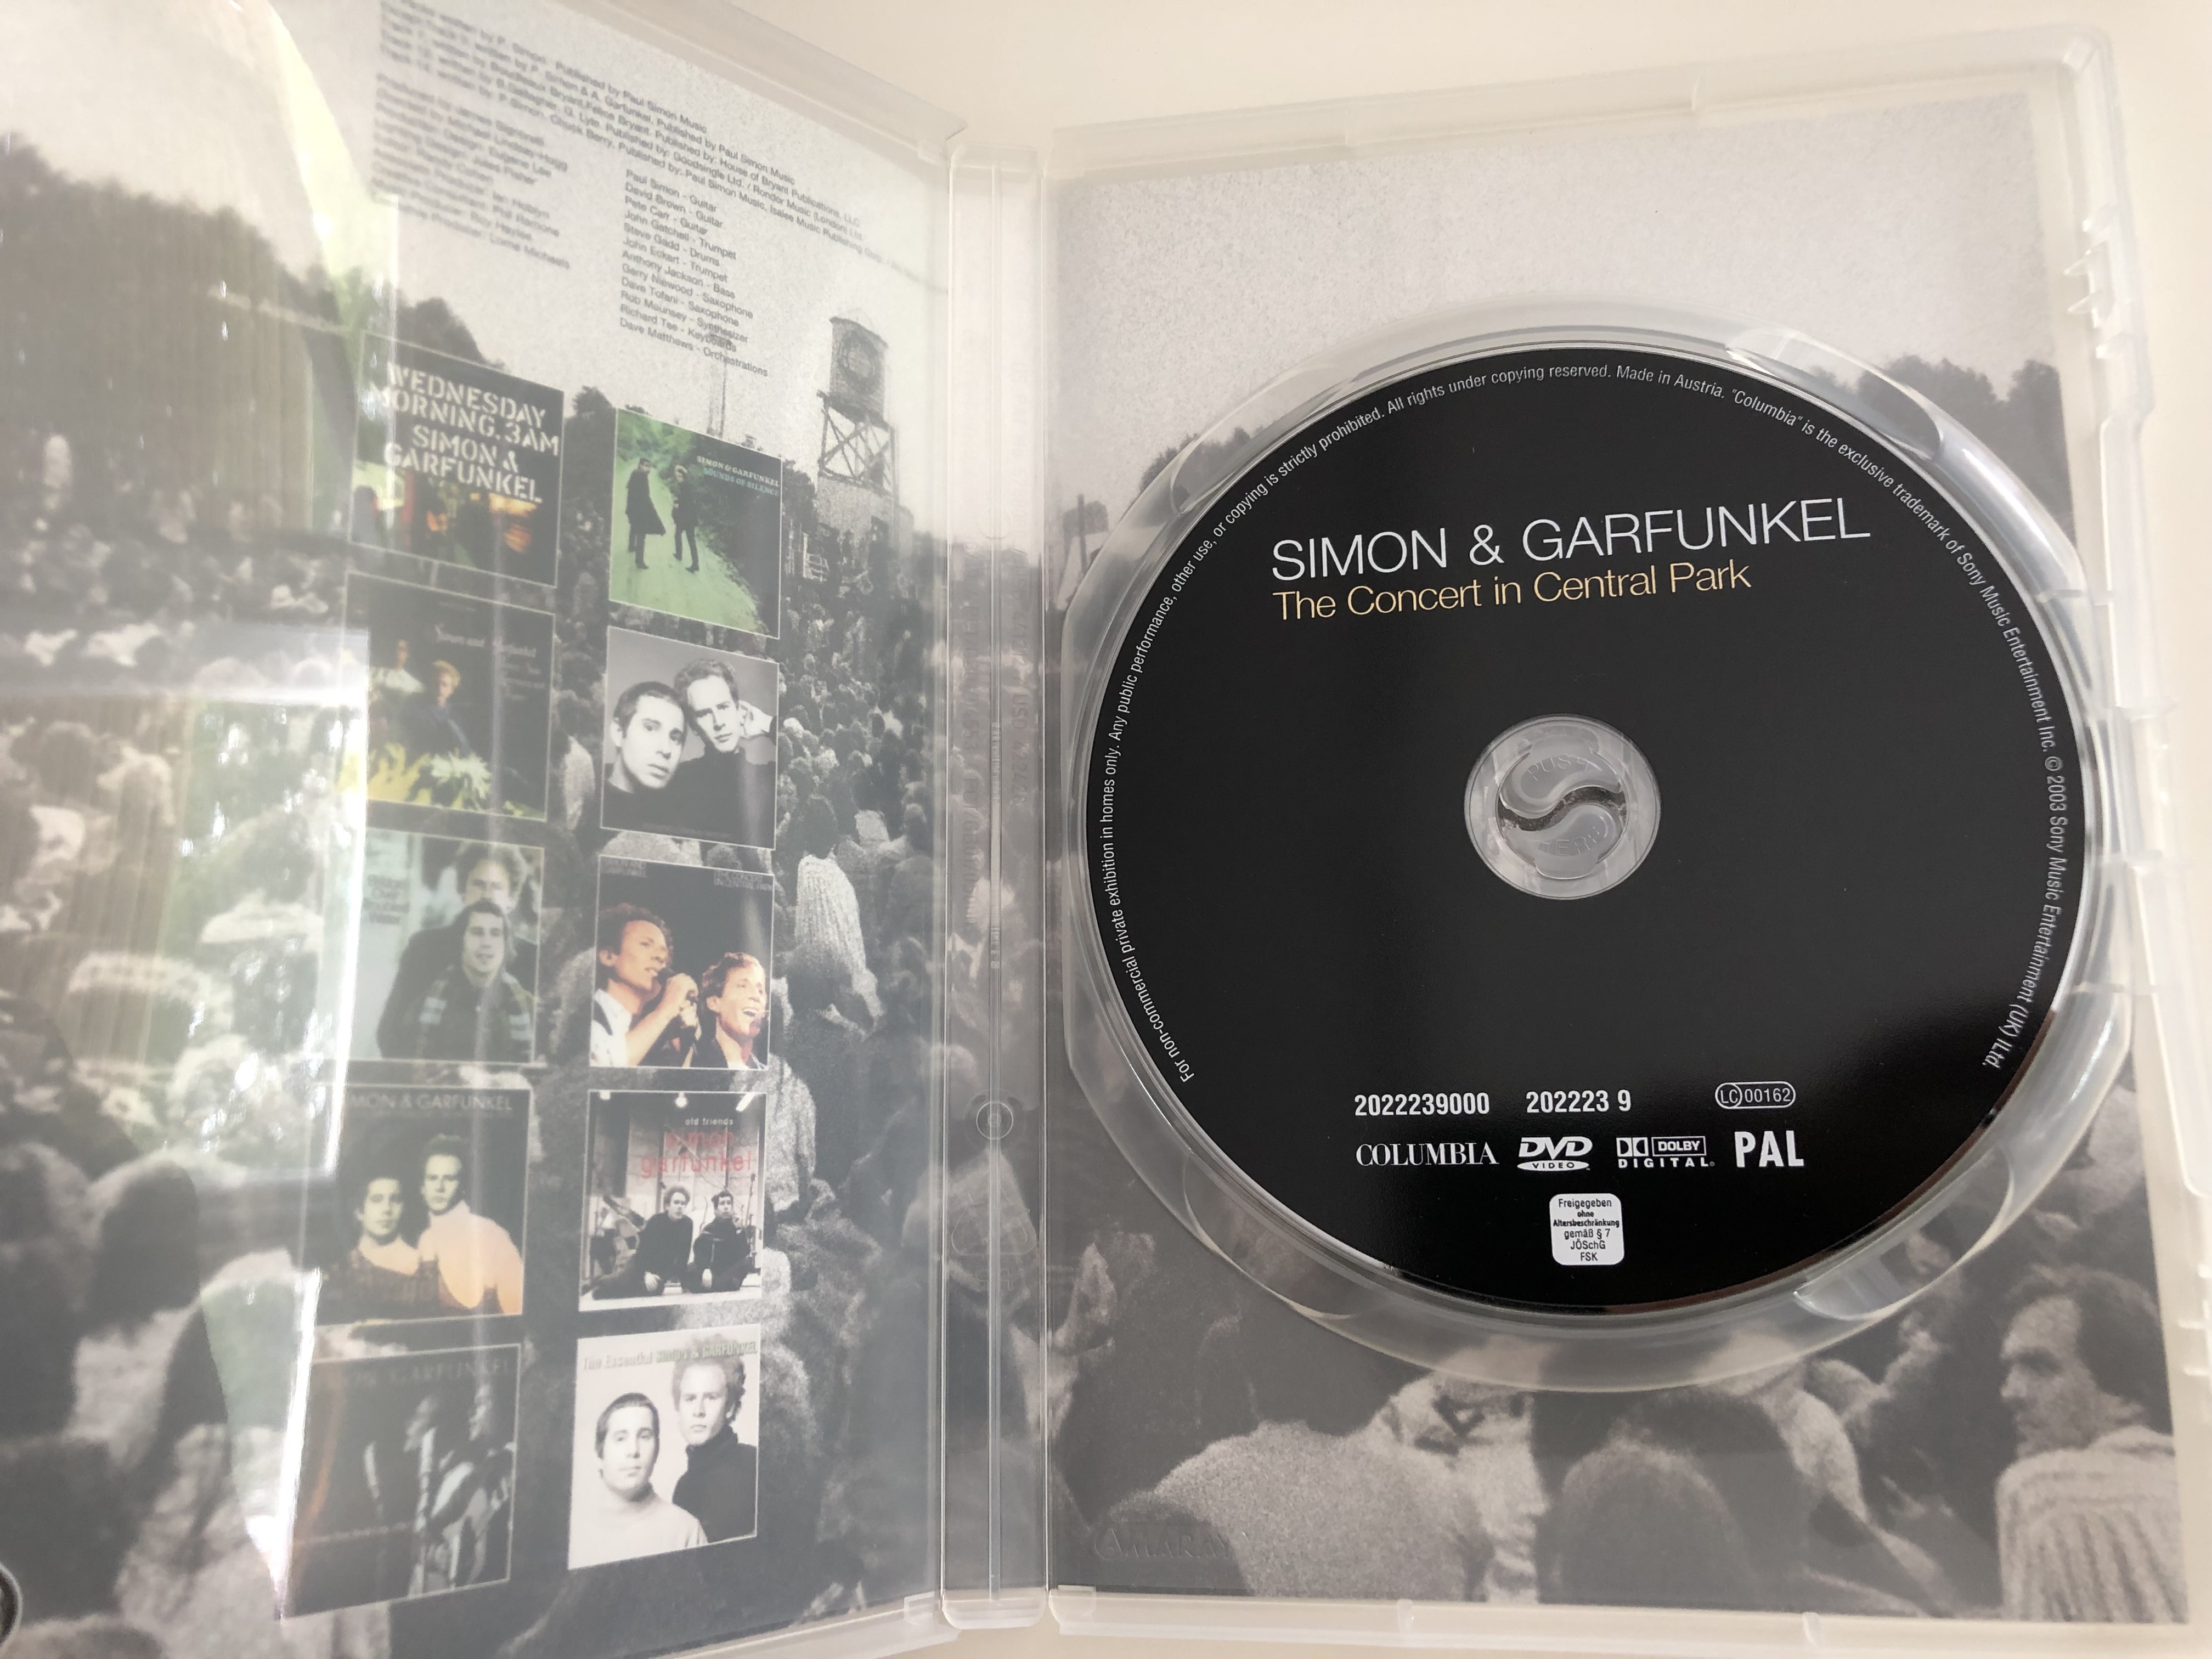 Simon & Garfunkel - The Concert in Central Park DVD 2003 / Recorded Live on  September 19, 1981 / Mrs. Robinson, American Tune, Late in the Evening /  Columbia ‎– 202223 9 - bibleinmylanguage